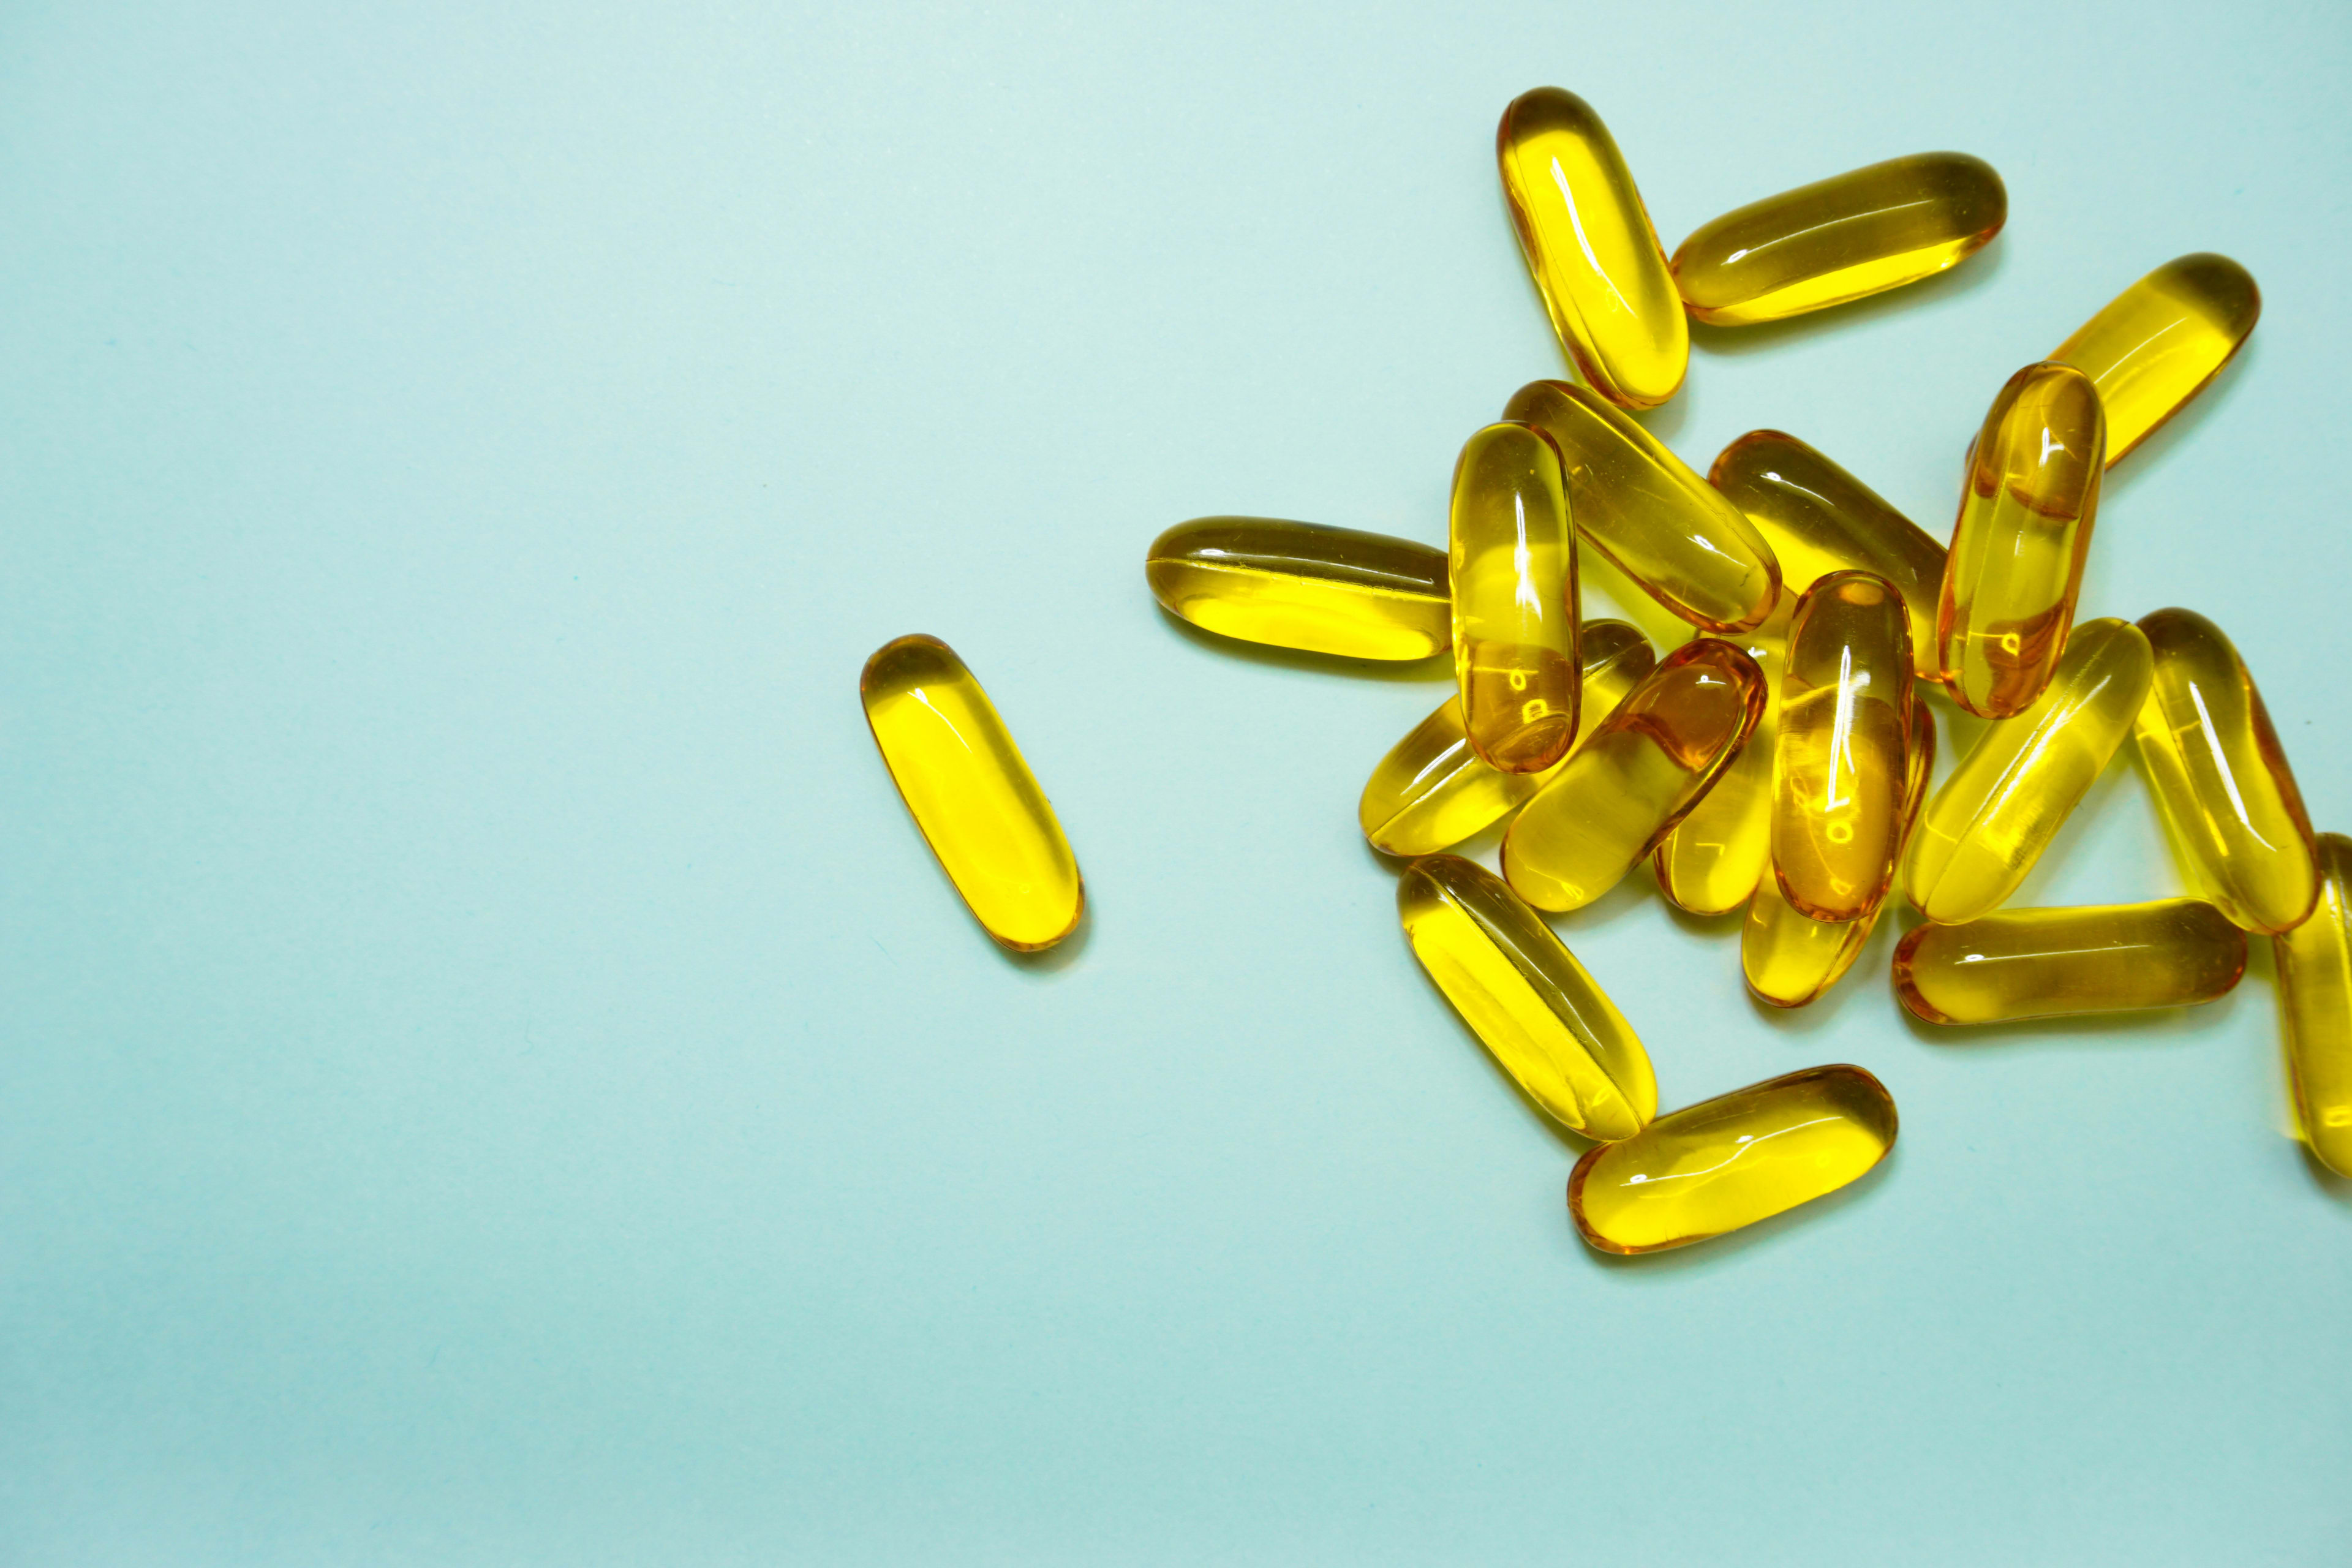 Why Take Supplements?